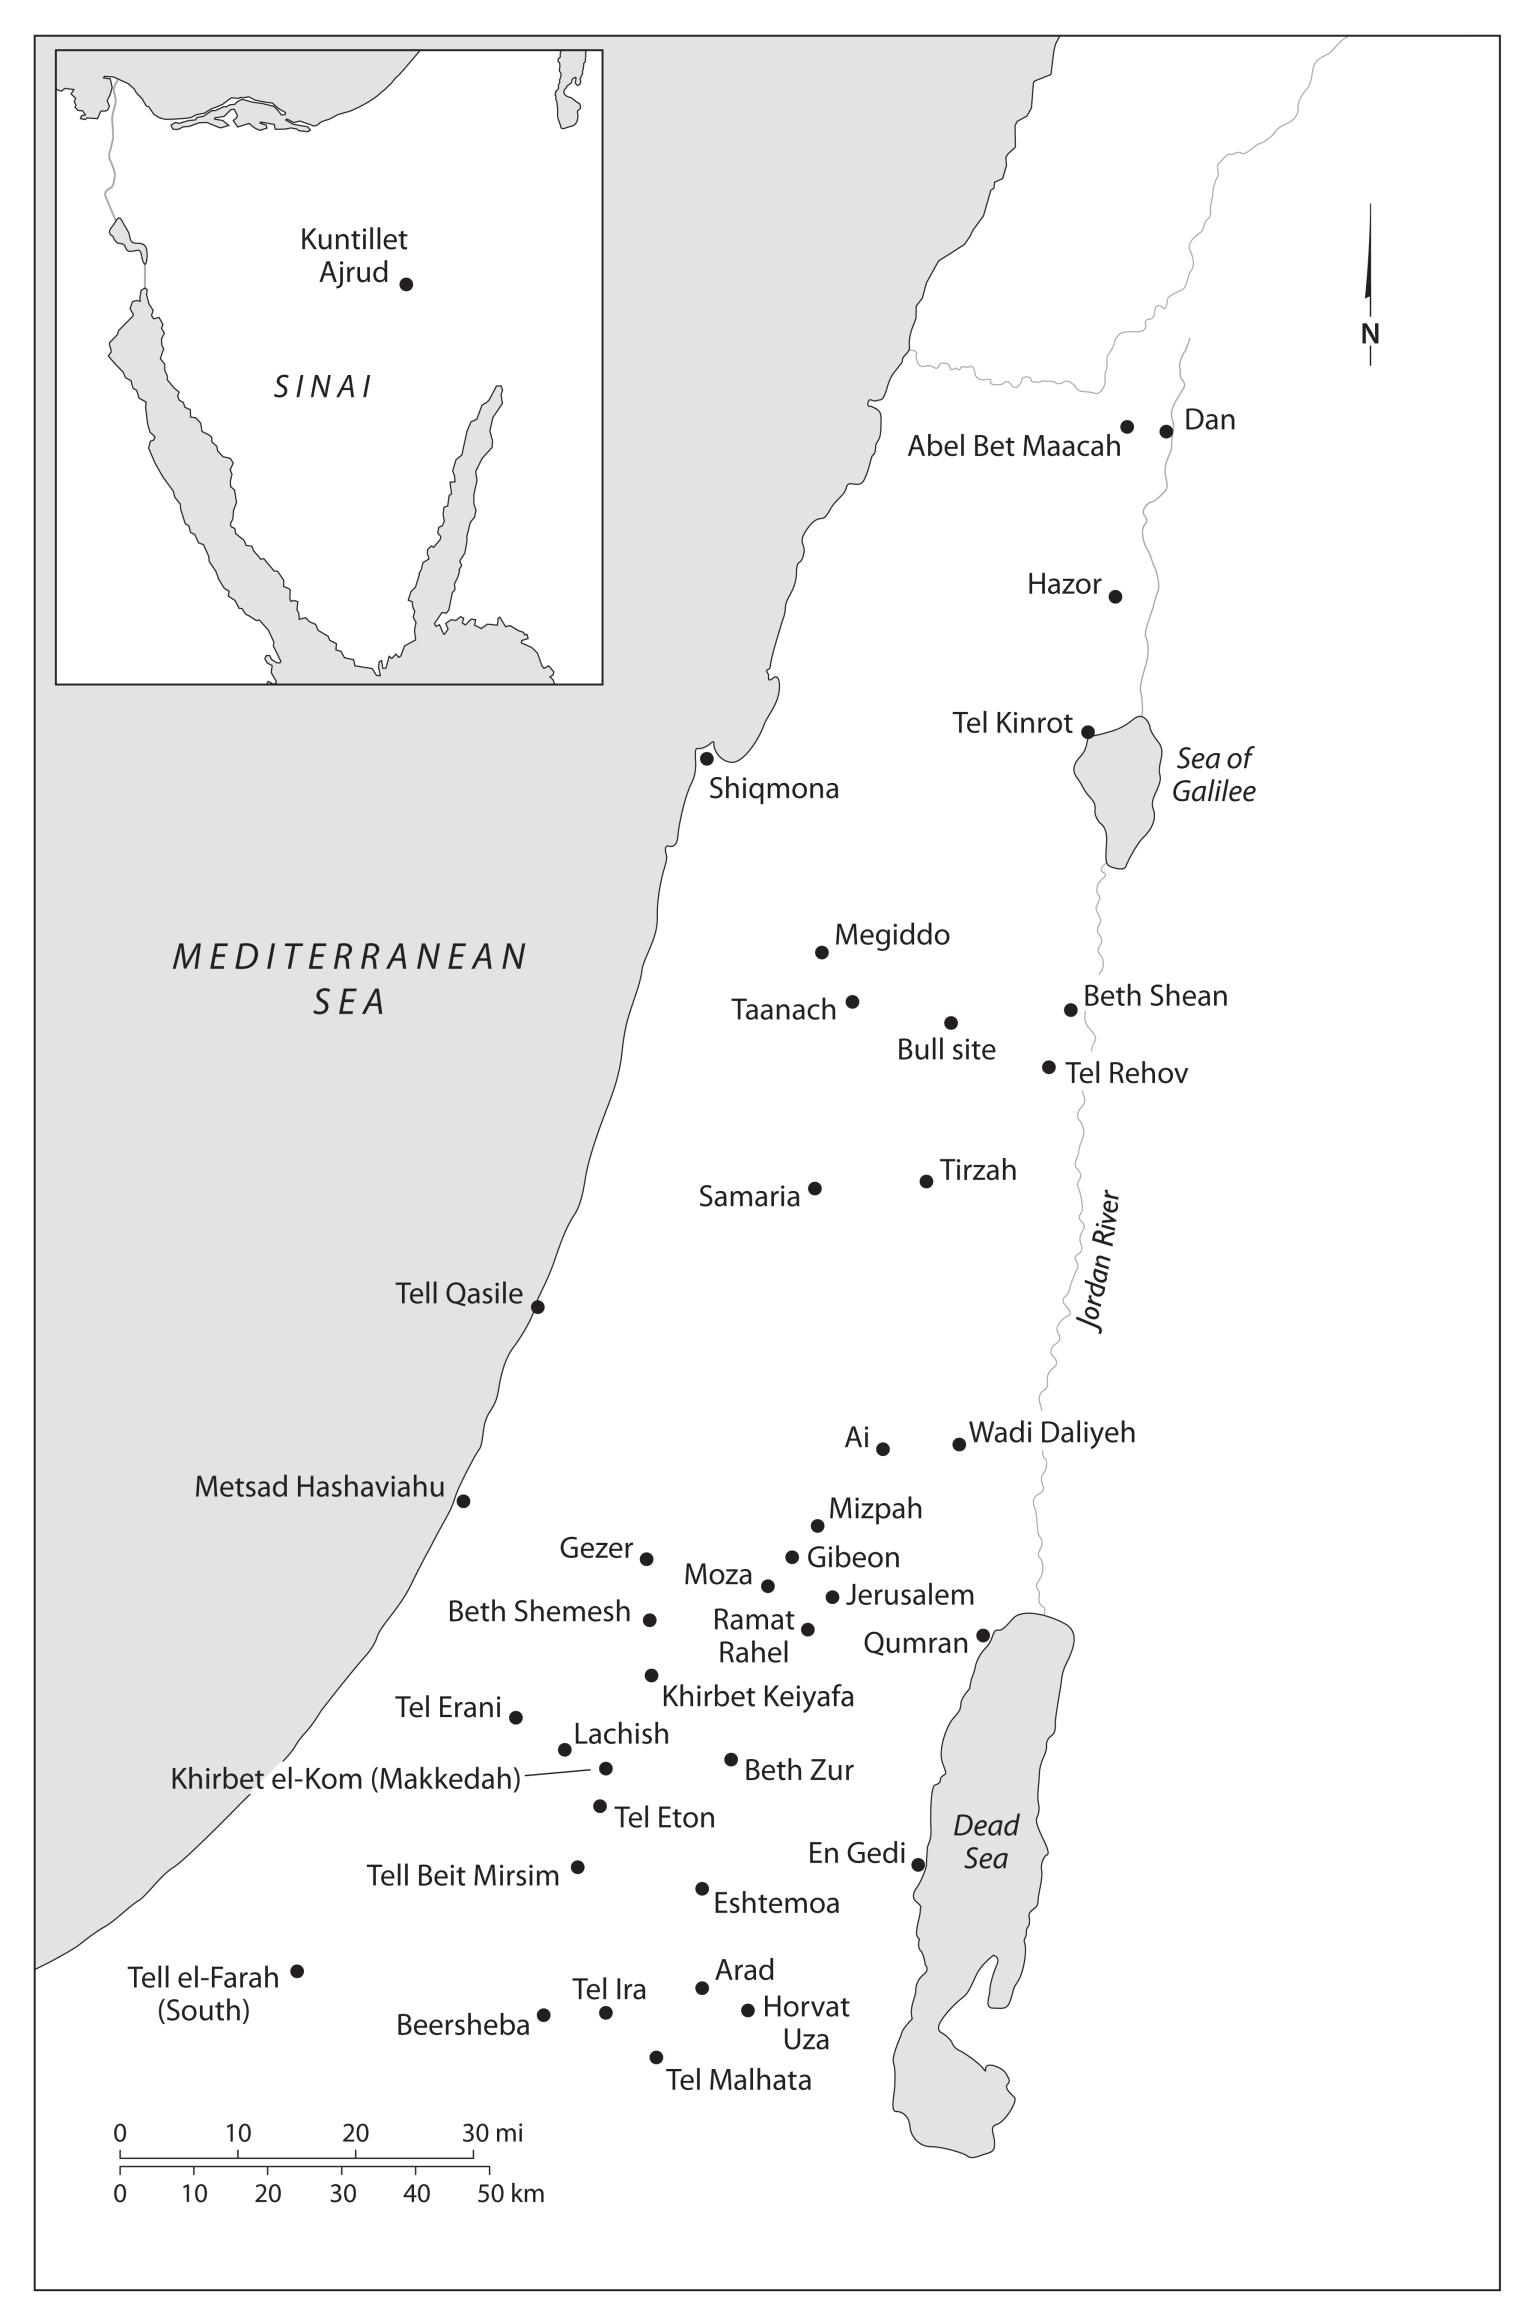 Map of Middle East with areas of interest marked with black dot and labeled in English; map of the Sinai peninsula with Kuntillet Ajrud denoted.  